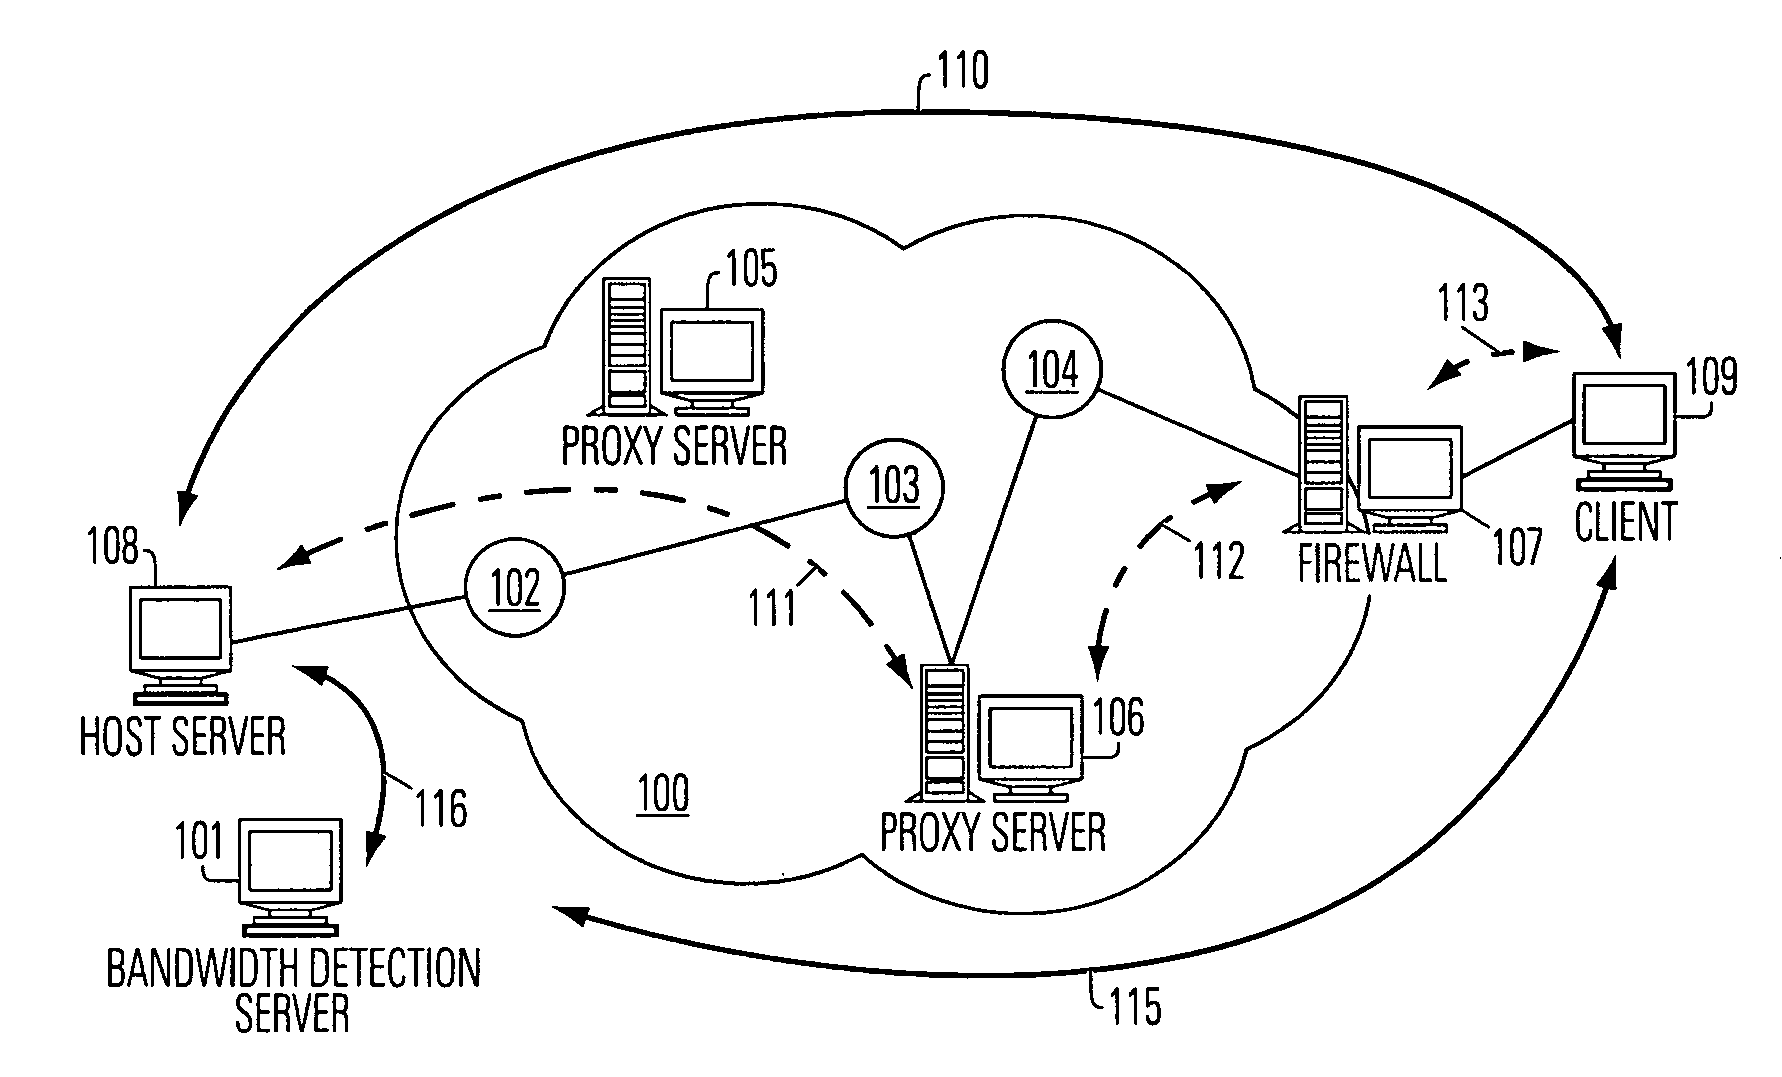 Bandwidth detection in a heterogeneous network with parallel and proxy modes